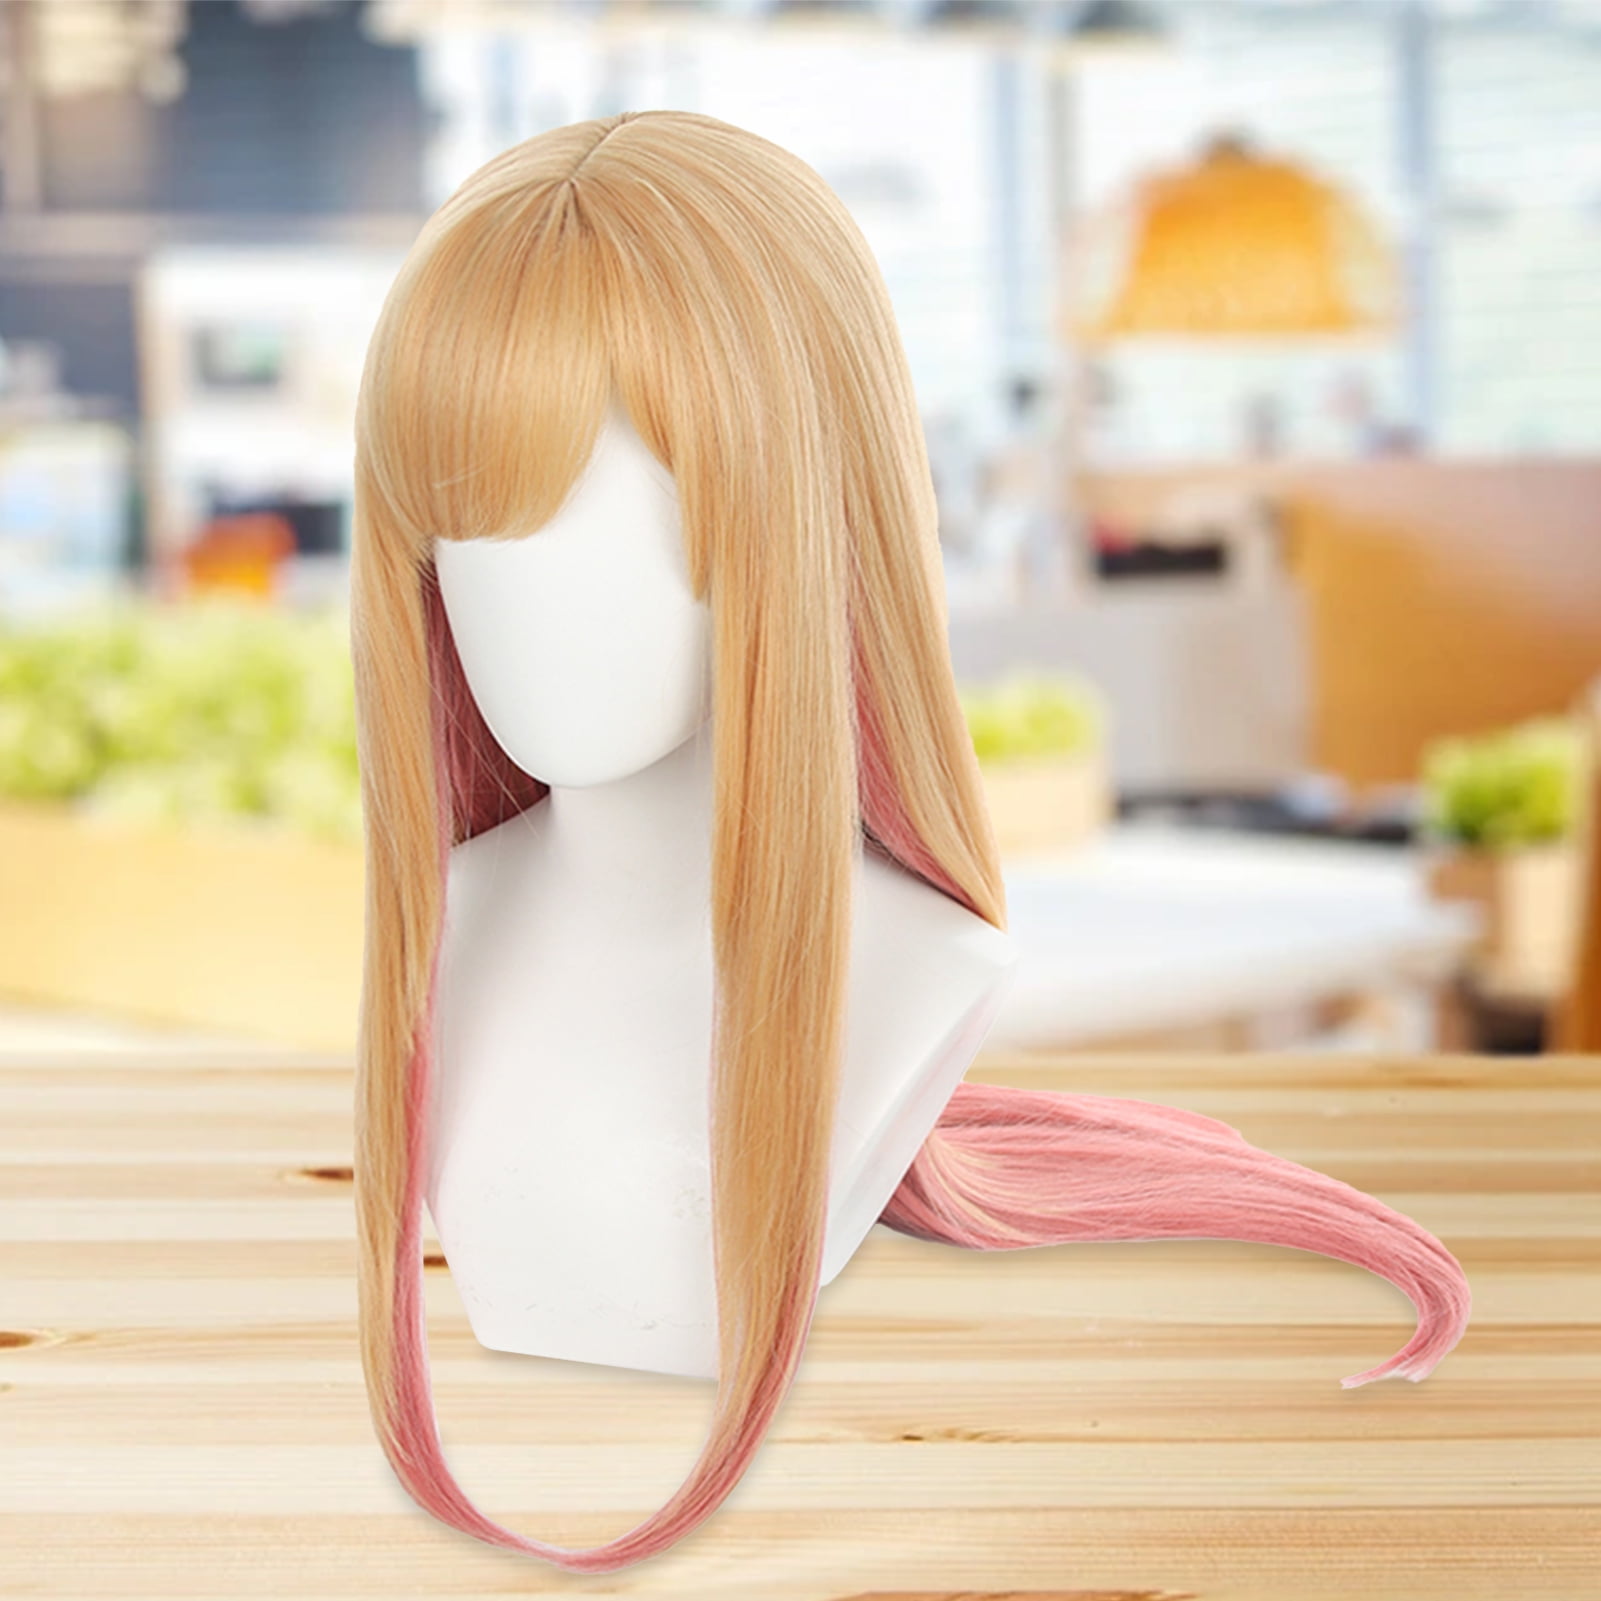 Jinnhelun Long Blonde Pink Wigs with Bangs Marin Kitagawa Cosplay Long  Straight Hair Wig for Girls Women Anime Halloween Party Costume